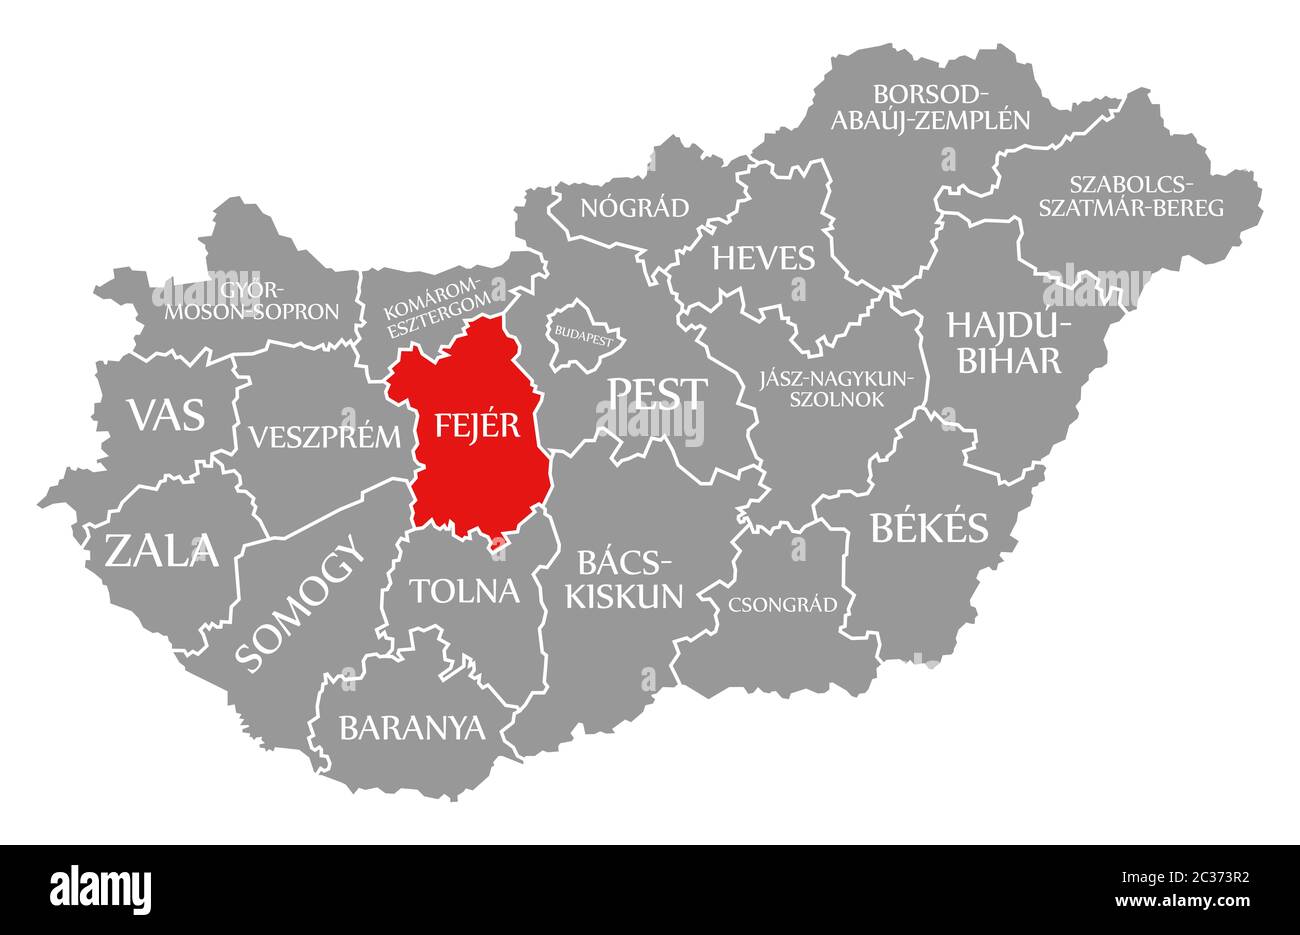 Fejer red highlighted in map of Hungary Stock Photo